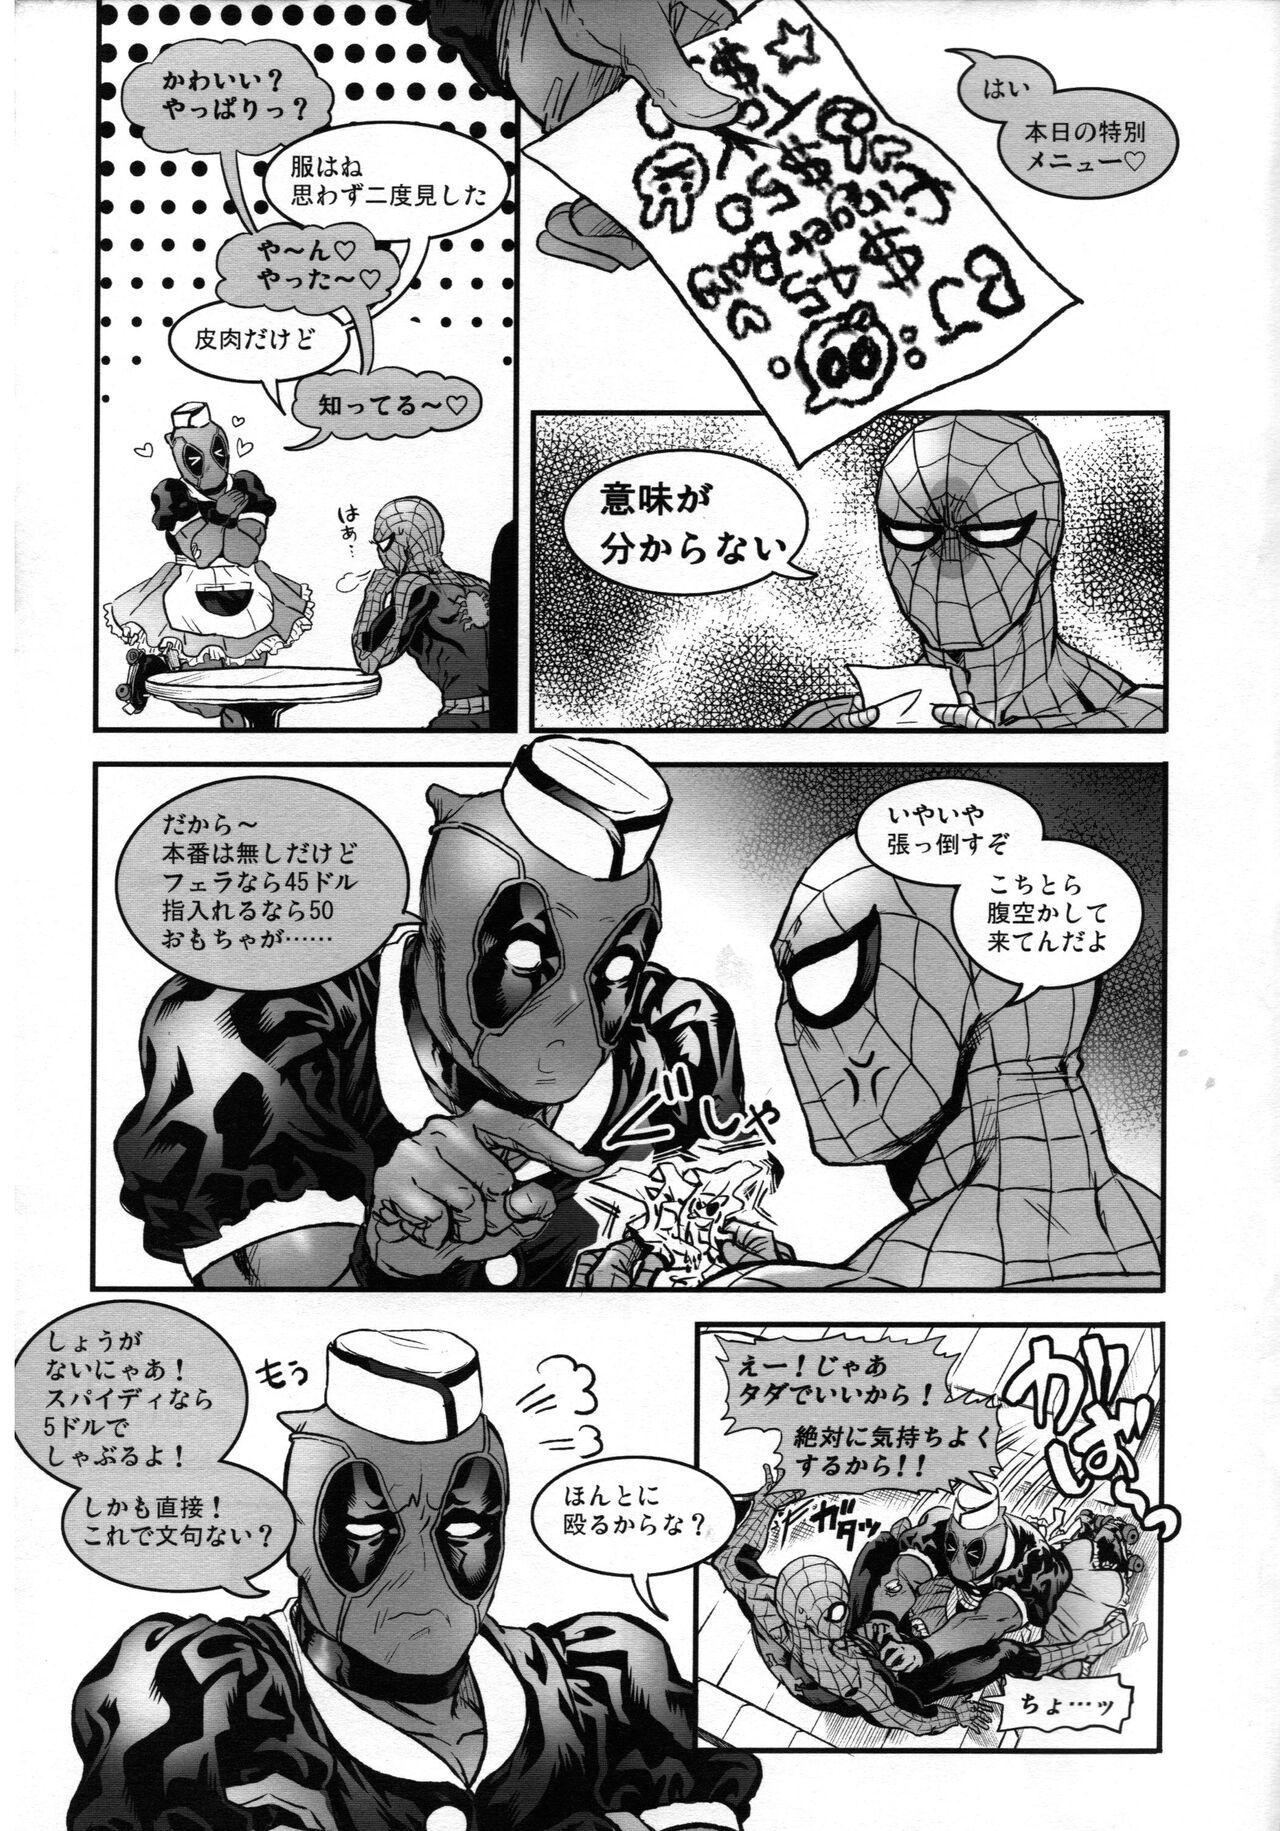 Bald Pussy TAKE OUT! - Spider-man Deadpool Tribute - Page 4